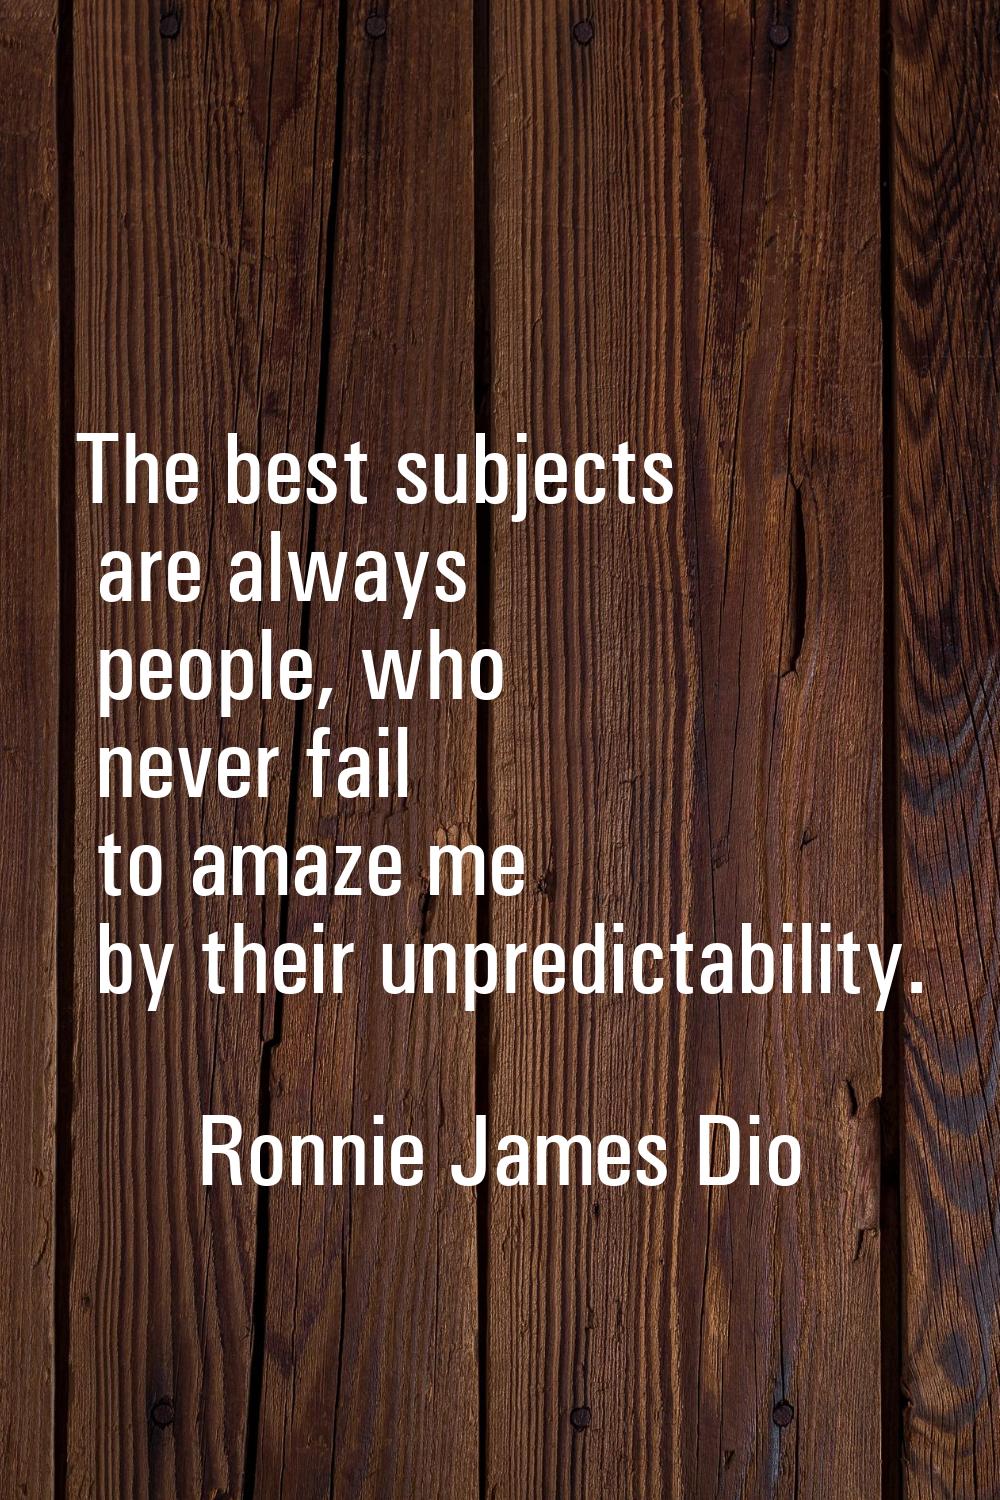 The best subjects are always people, who never fail to amaze me by their unpredictability.